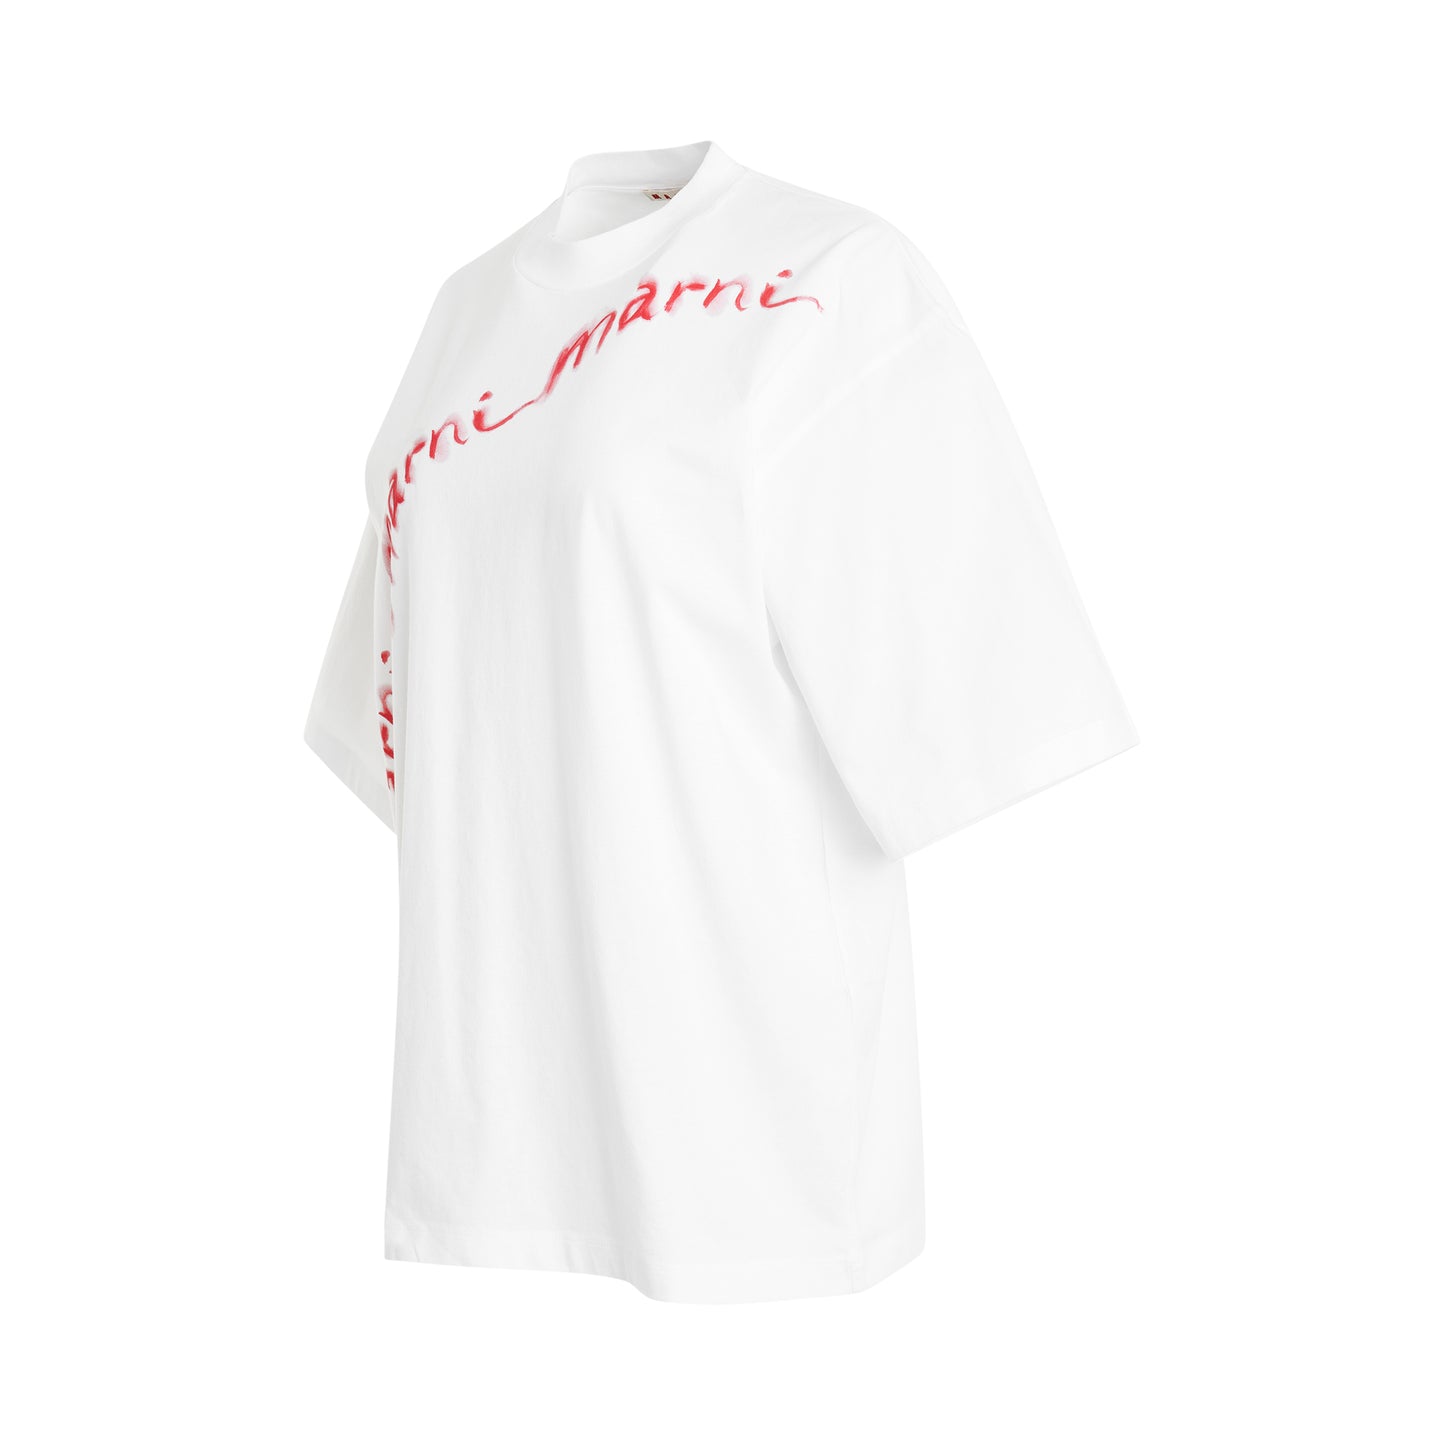 Curved Logo T-Shirt in White